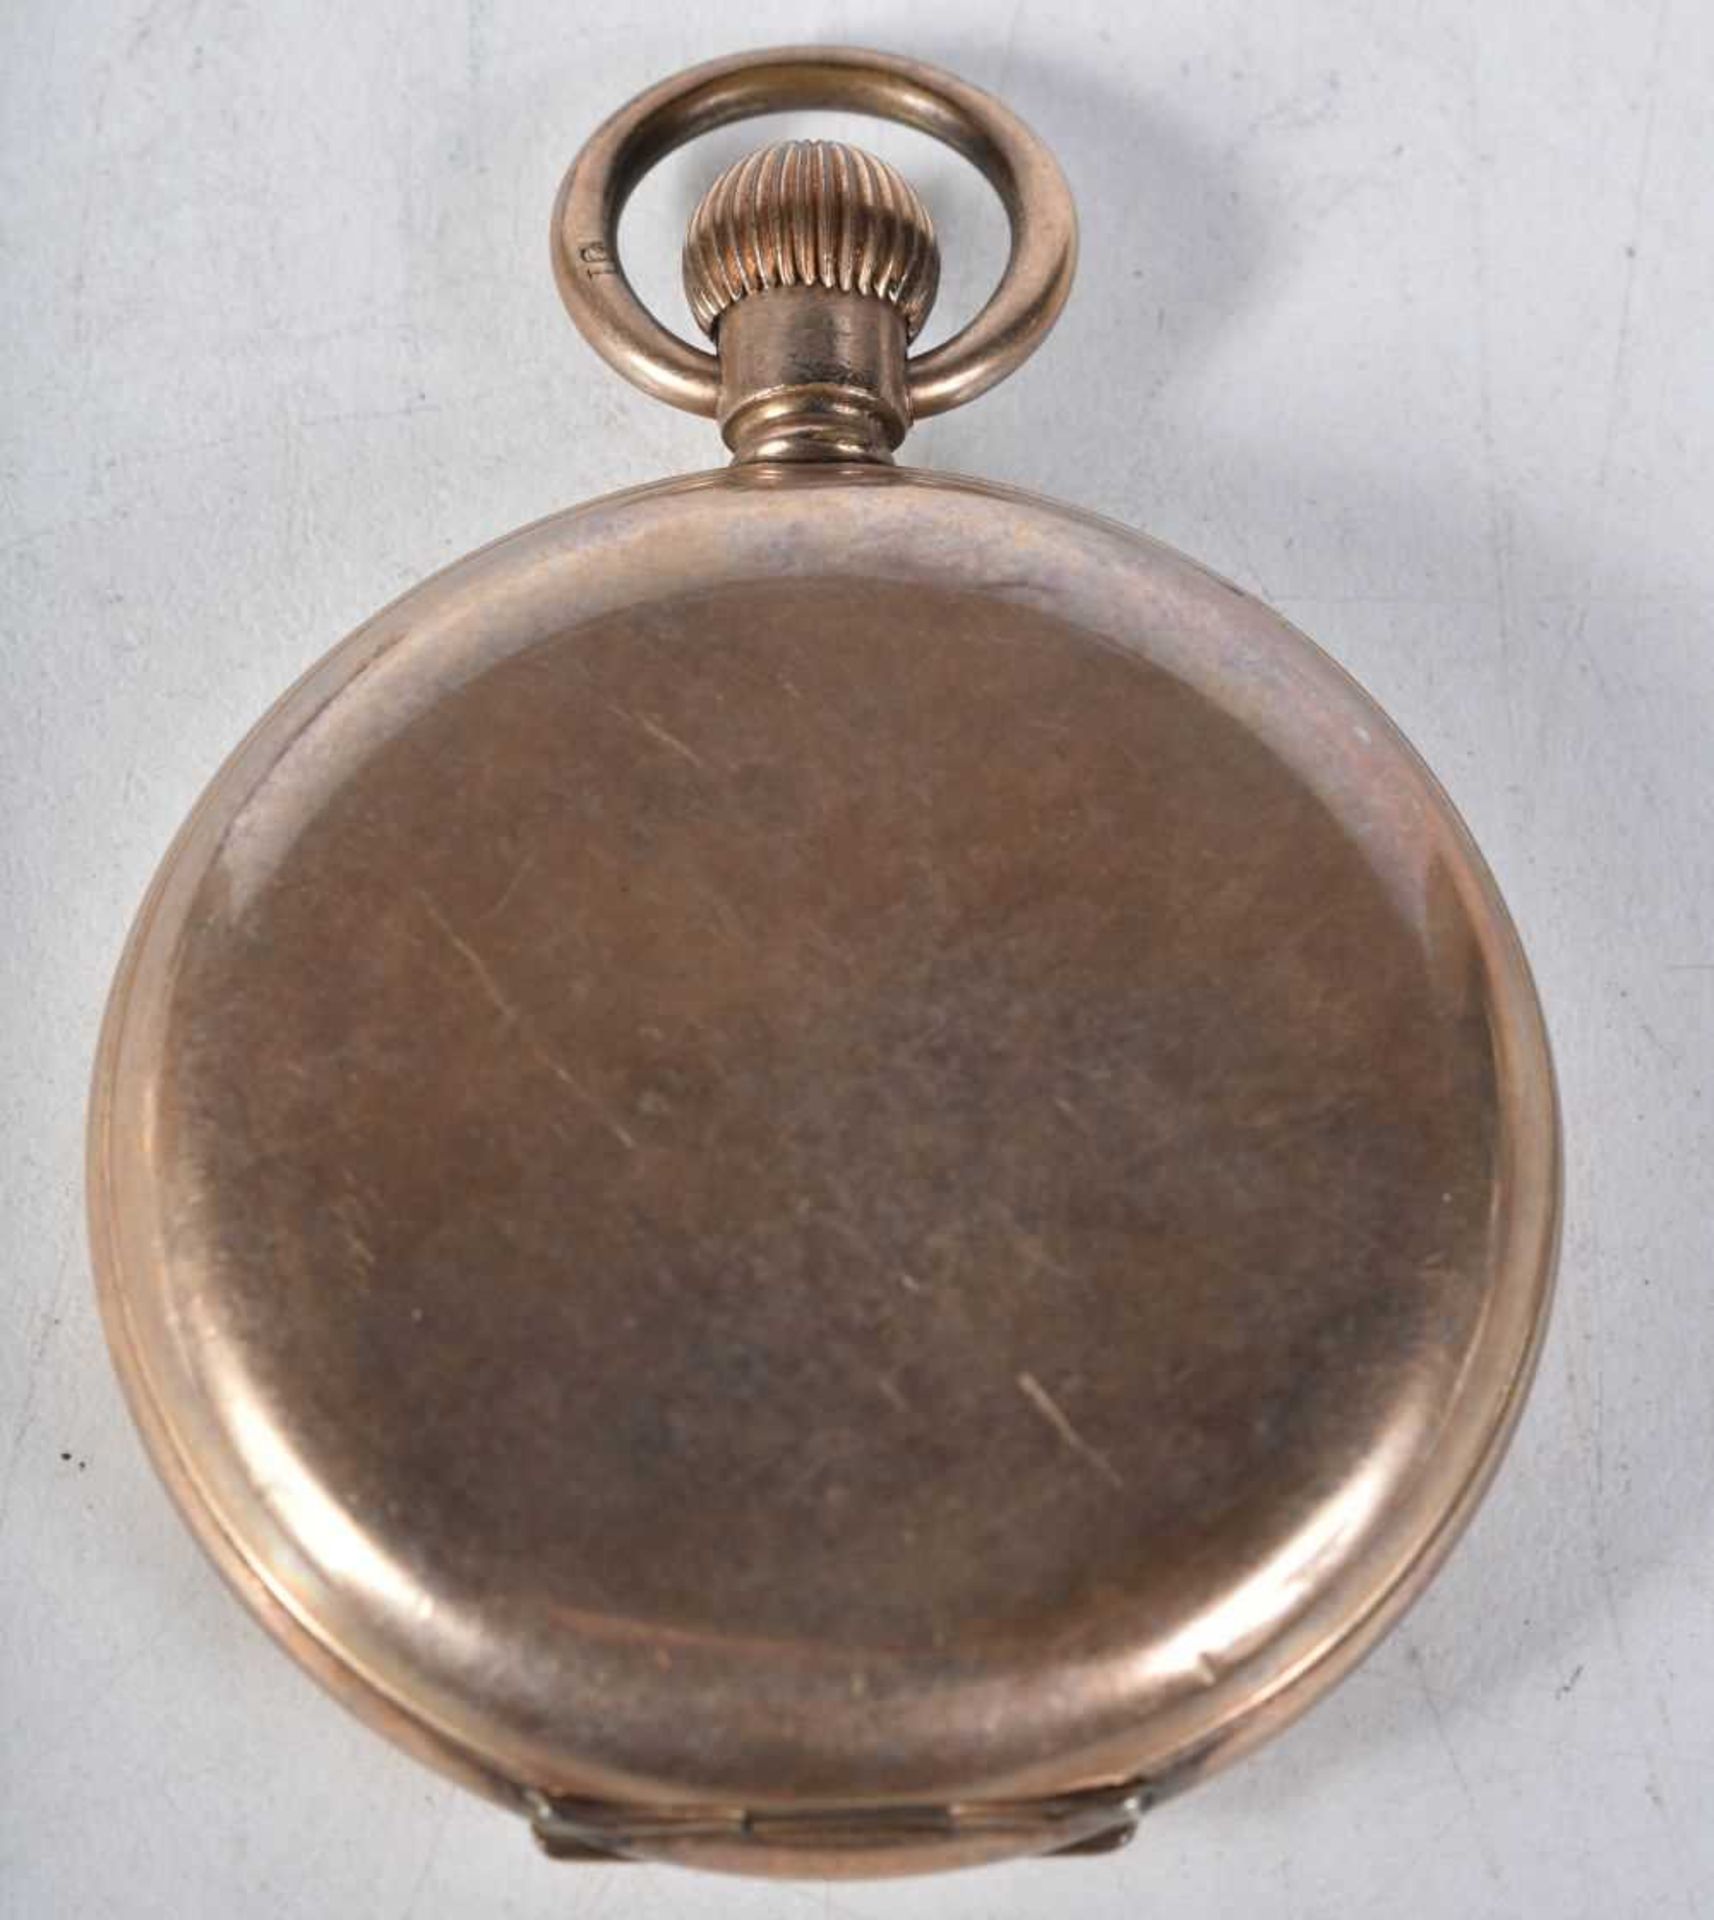 An Elgin Pocket Watch with White Enamel Dial and Black Roman Numerals. 5cm diameter, working - Image 2 of 3